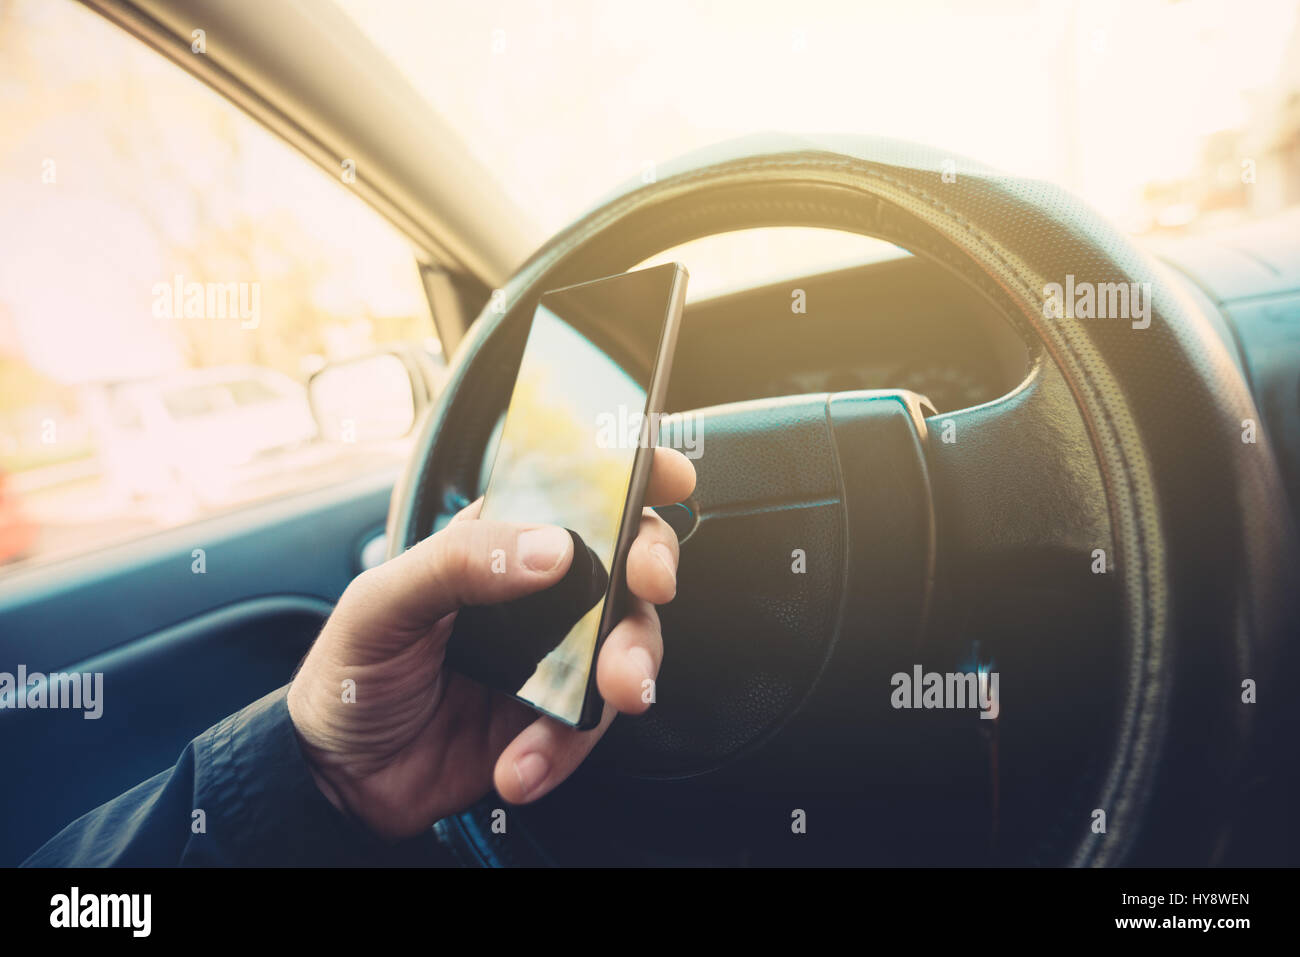 Using mobile phone and driving car, smart phone in male hand on steering wheel, selective focus Stock Photo